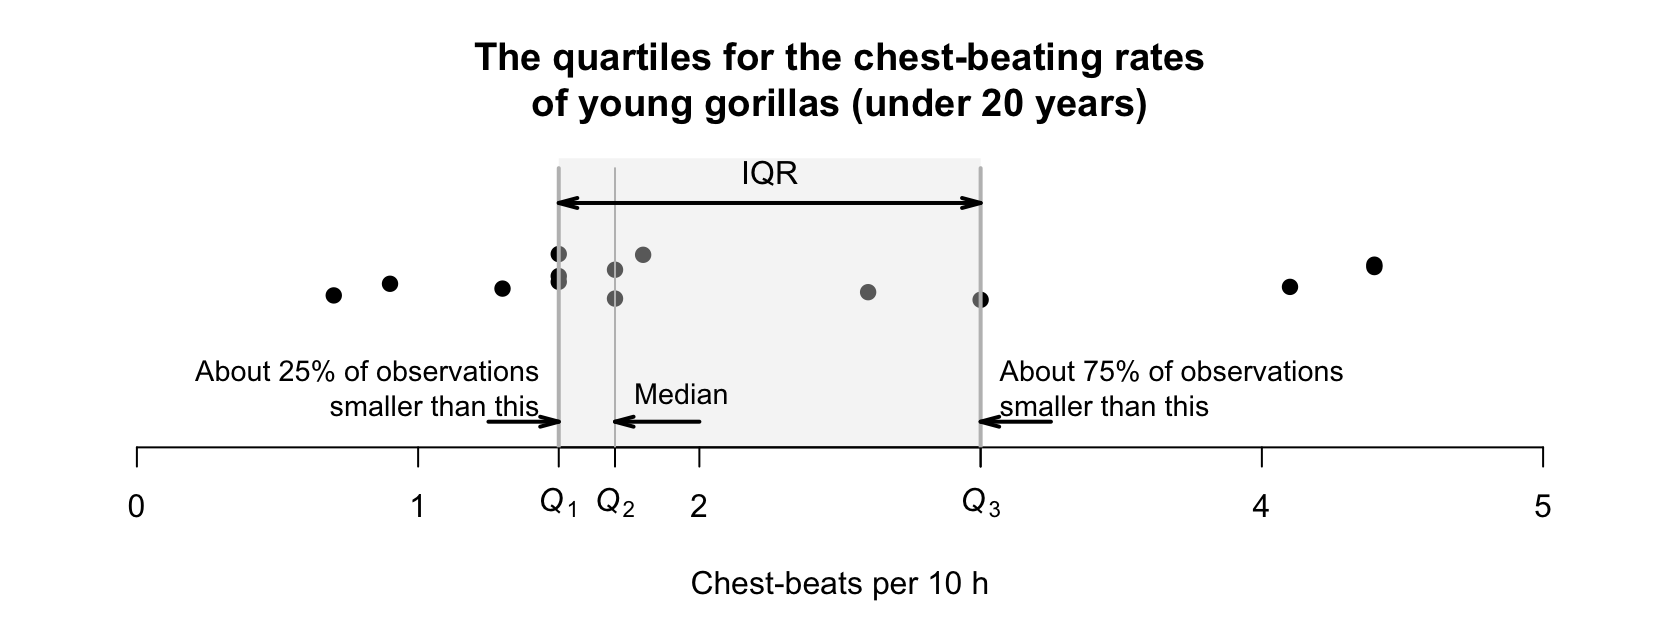 A dotchart for the chest-beating data for young gorillas showing the IQR